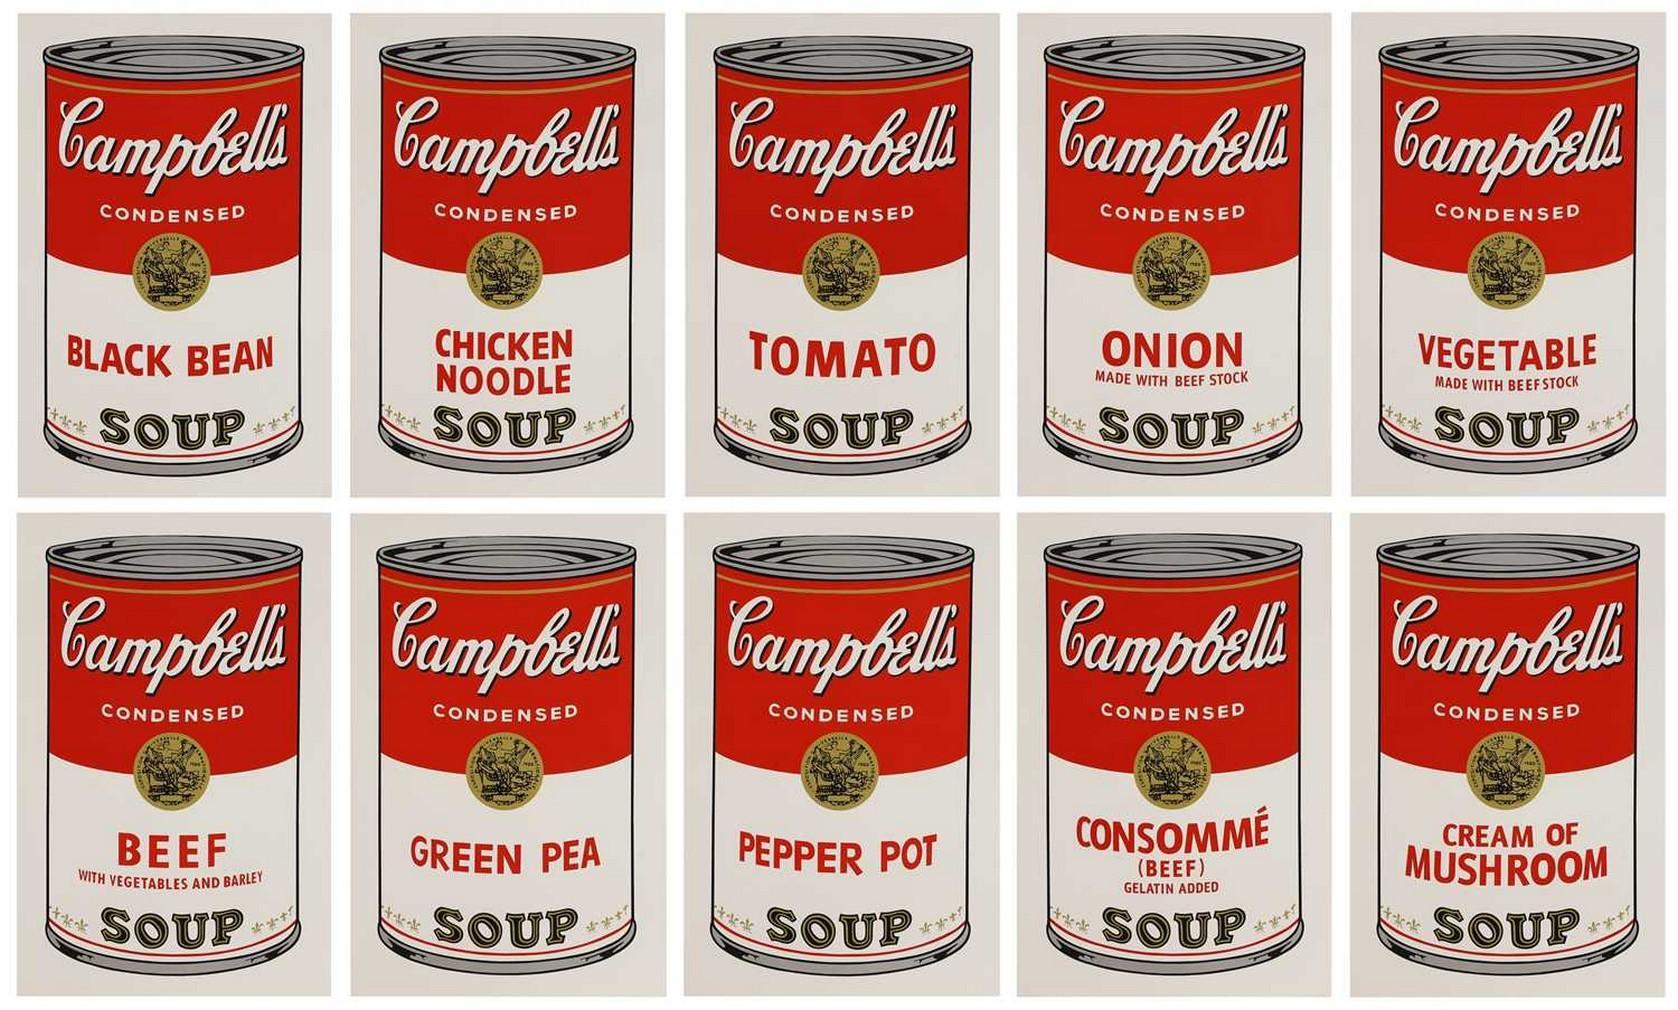 Campbells Soup - Cream of Mushroom - Print by (after) Andy Warhol